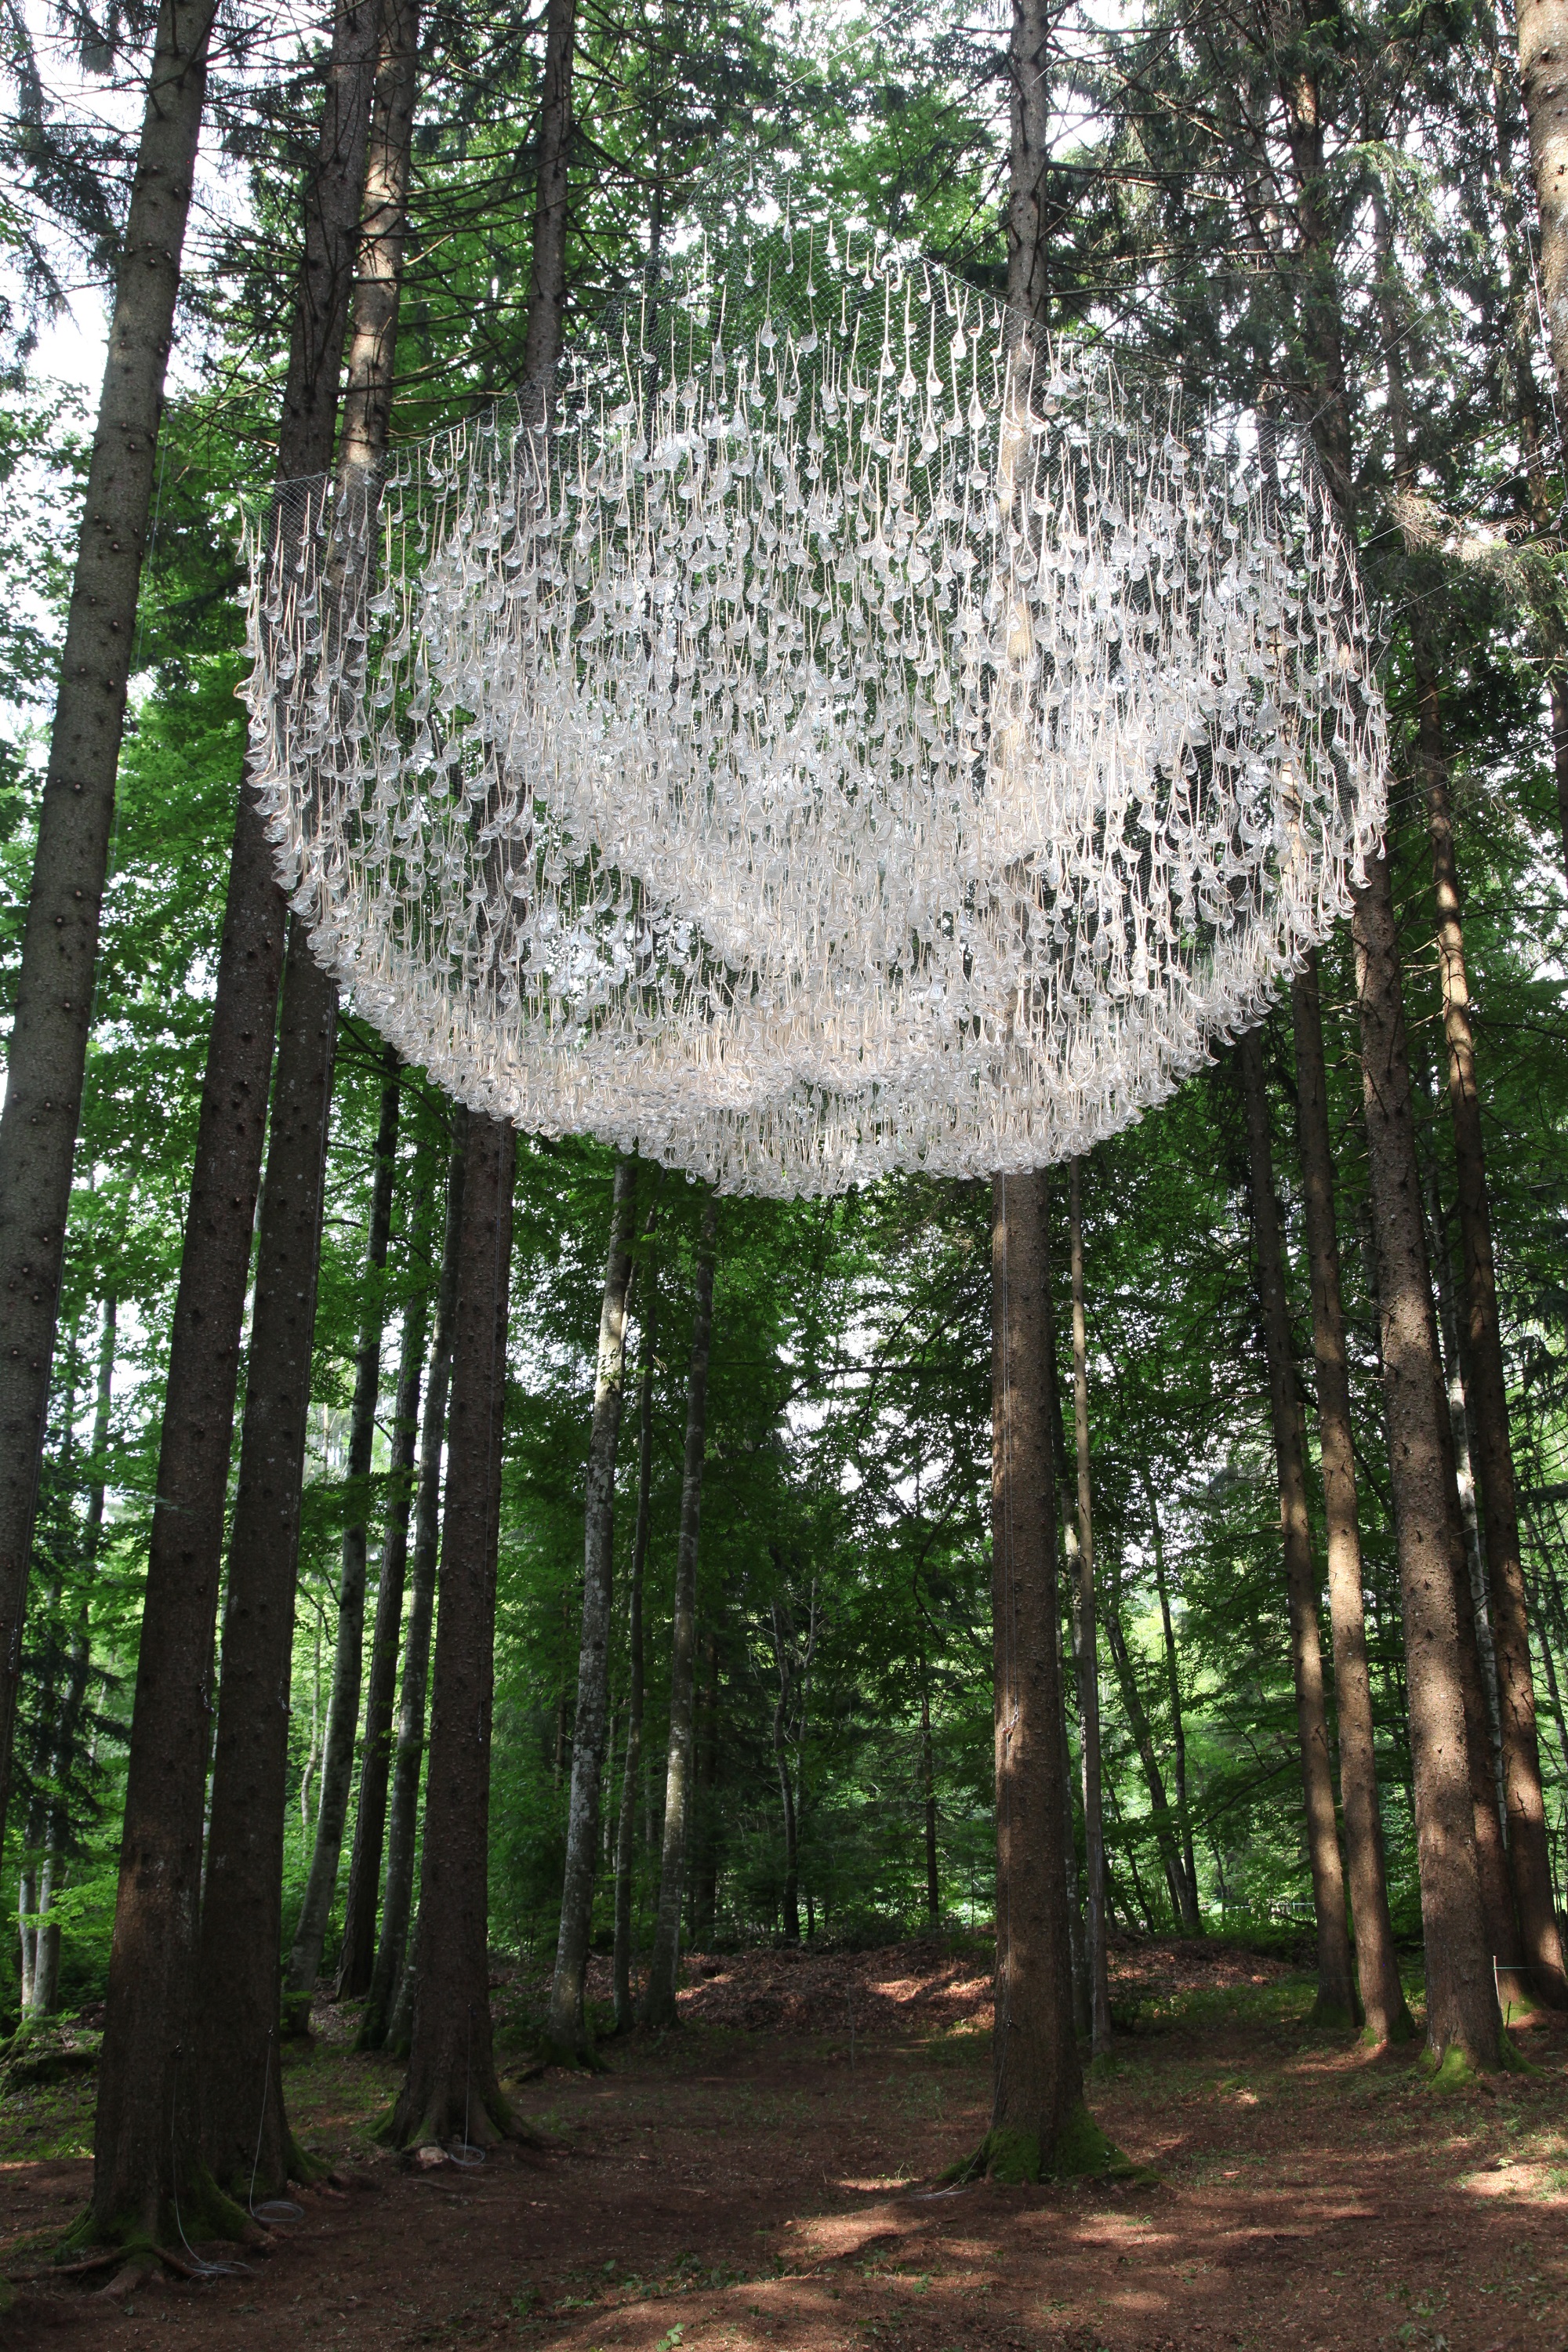 Rainwater Collecting Installation by John Grade Dazzles Like an Outdoor Chandelier